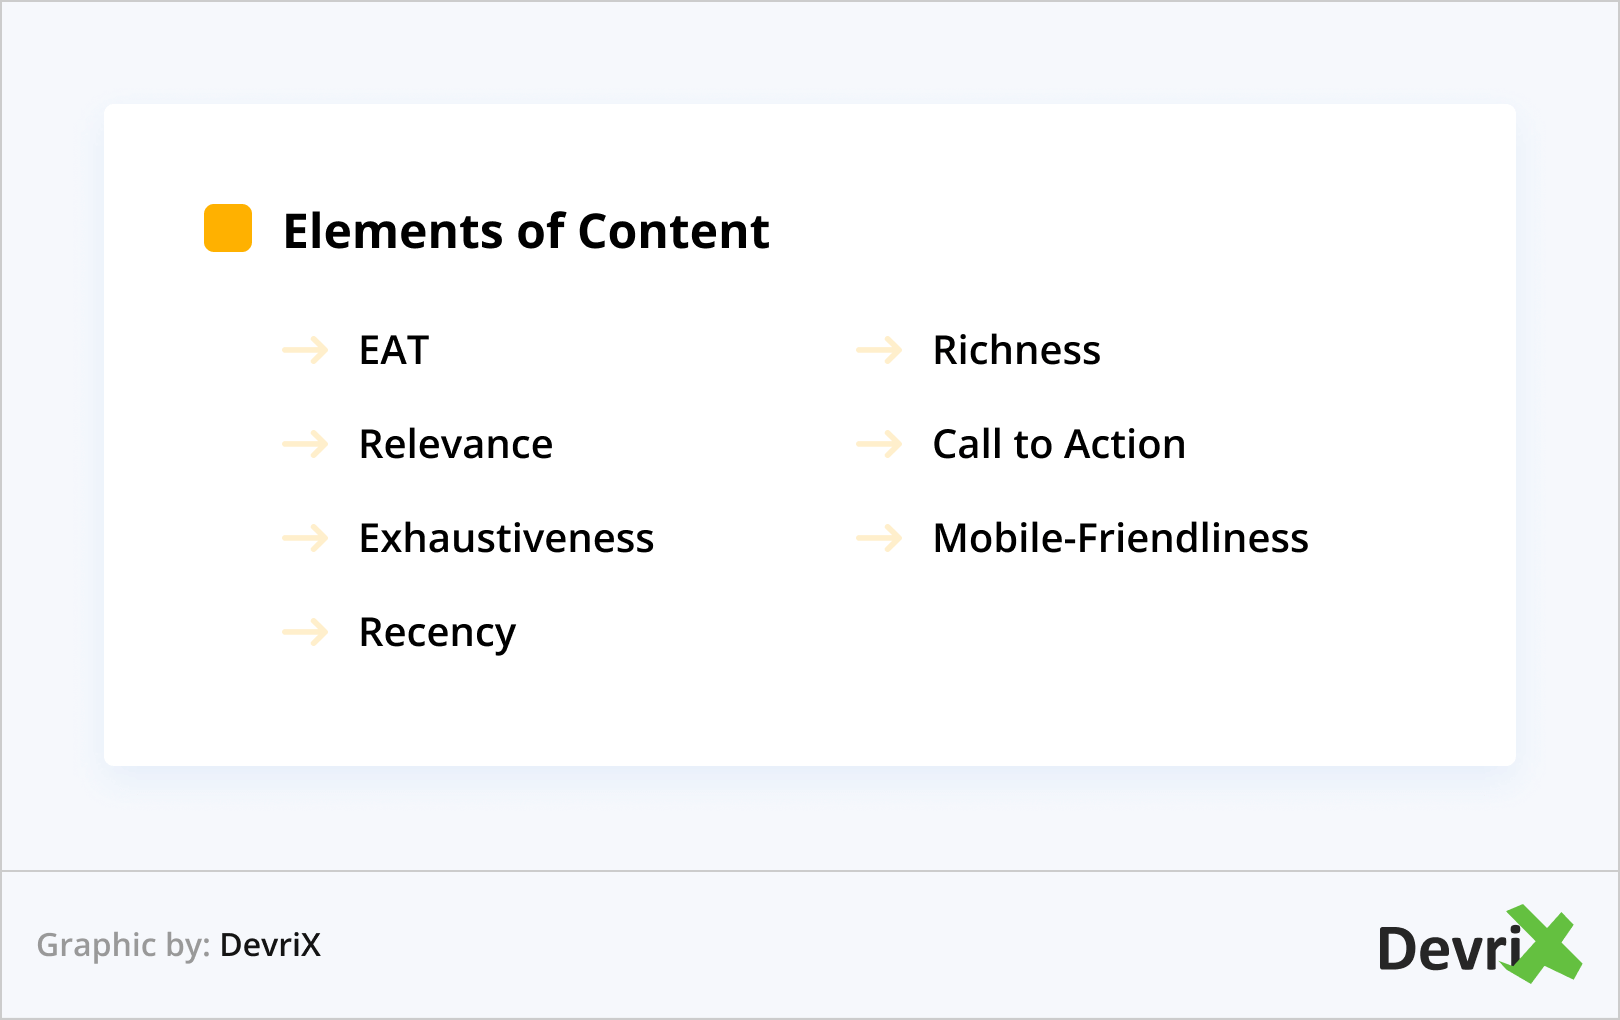 Elements of Content